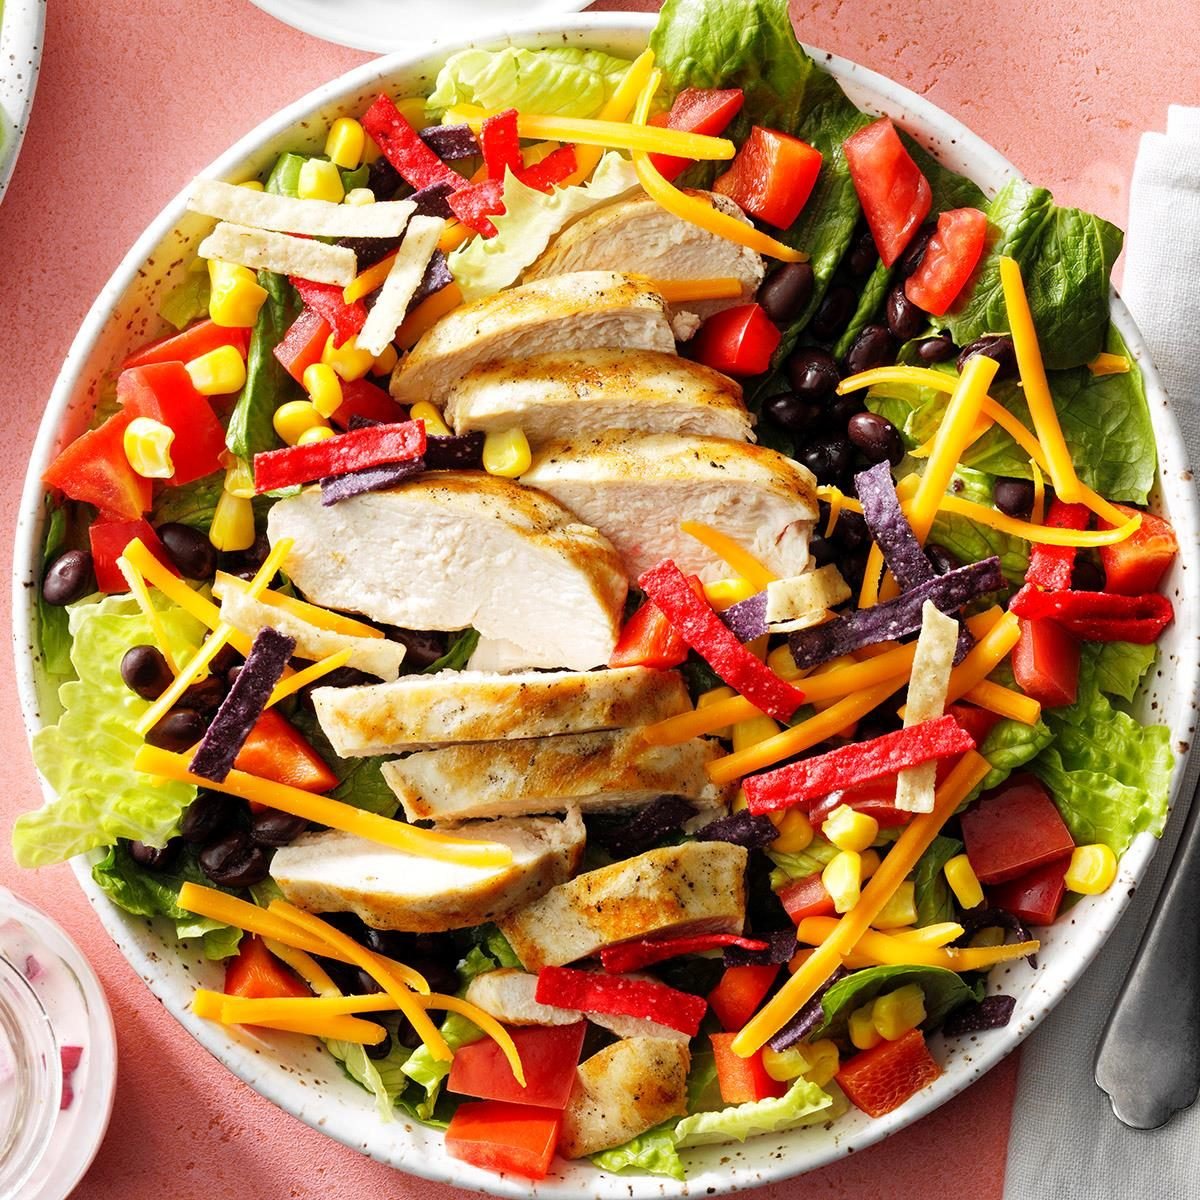 15 Easy High-Protein Salads to Make for Dinner